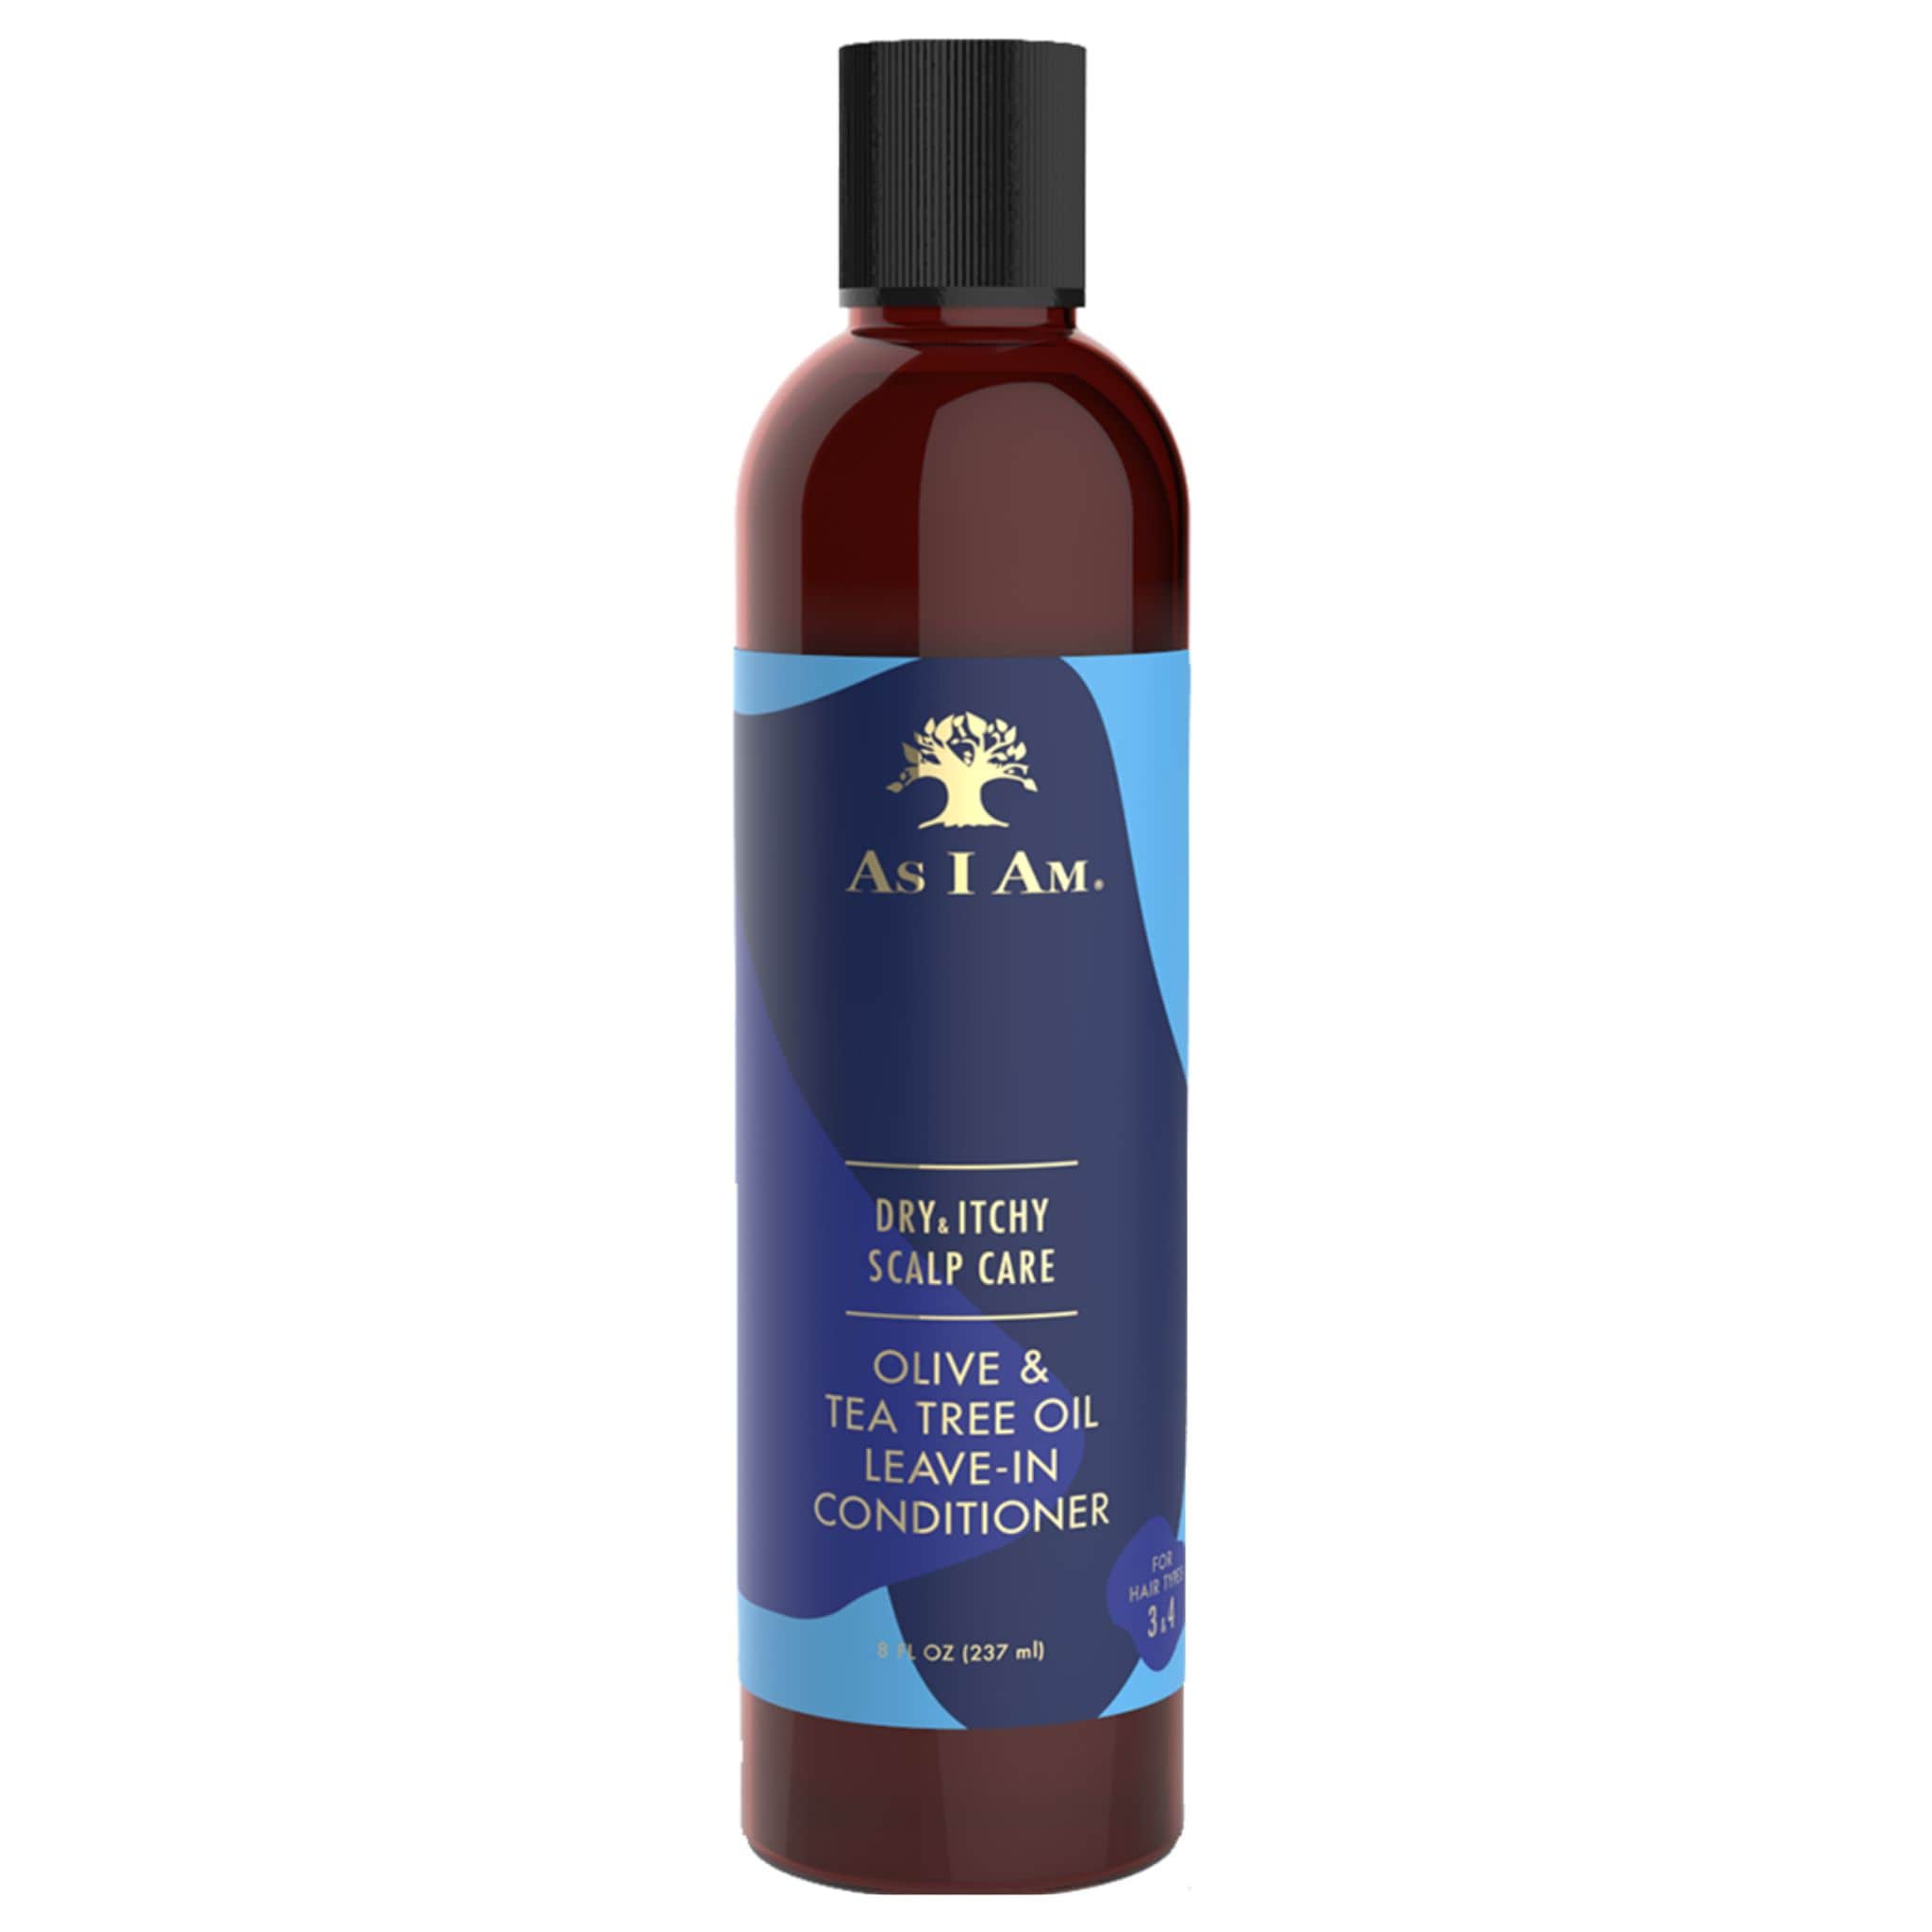 AS I AM AS I AM Dry & Itchy Leave In Conditioner 237ml